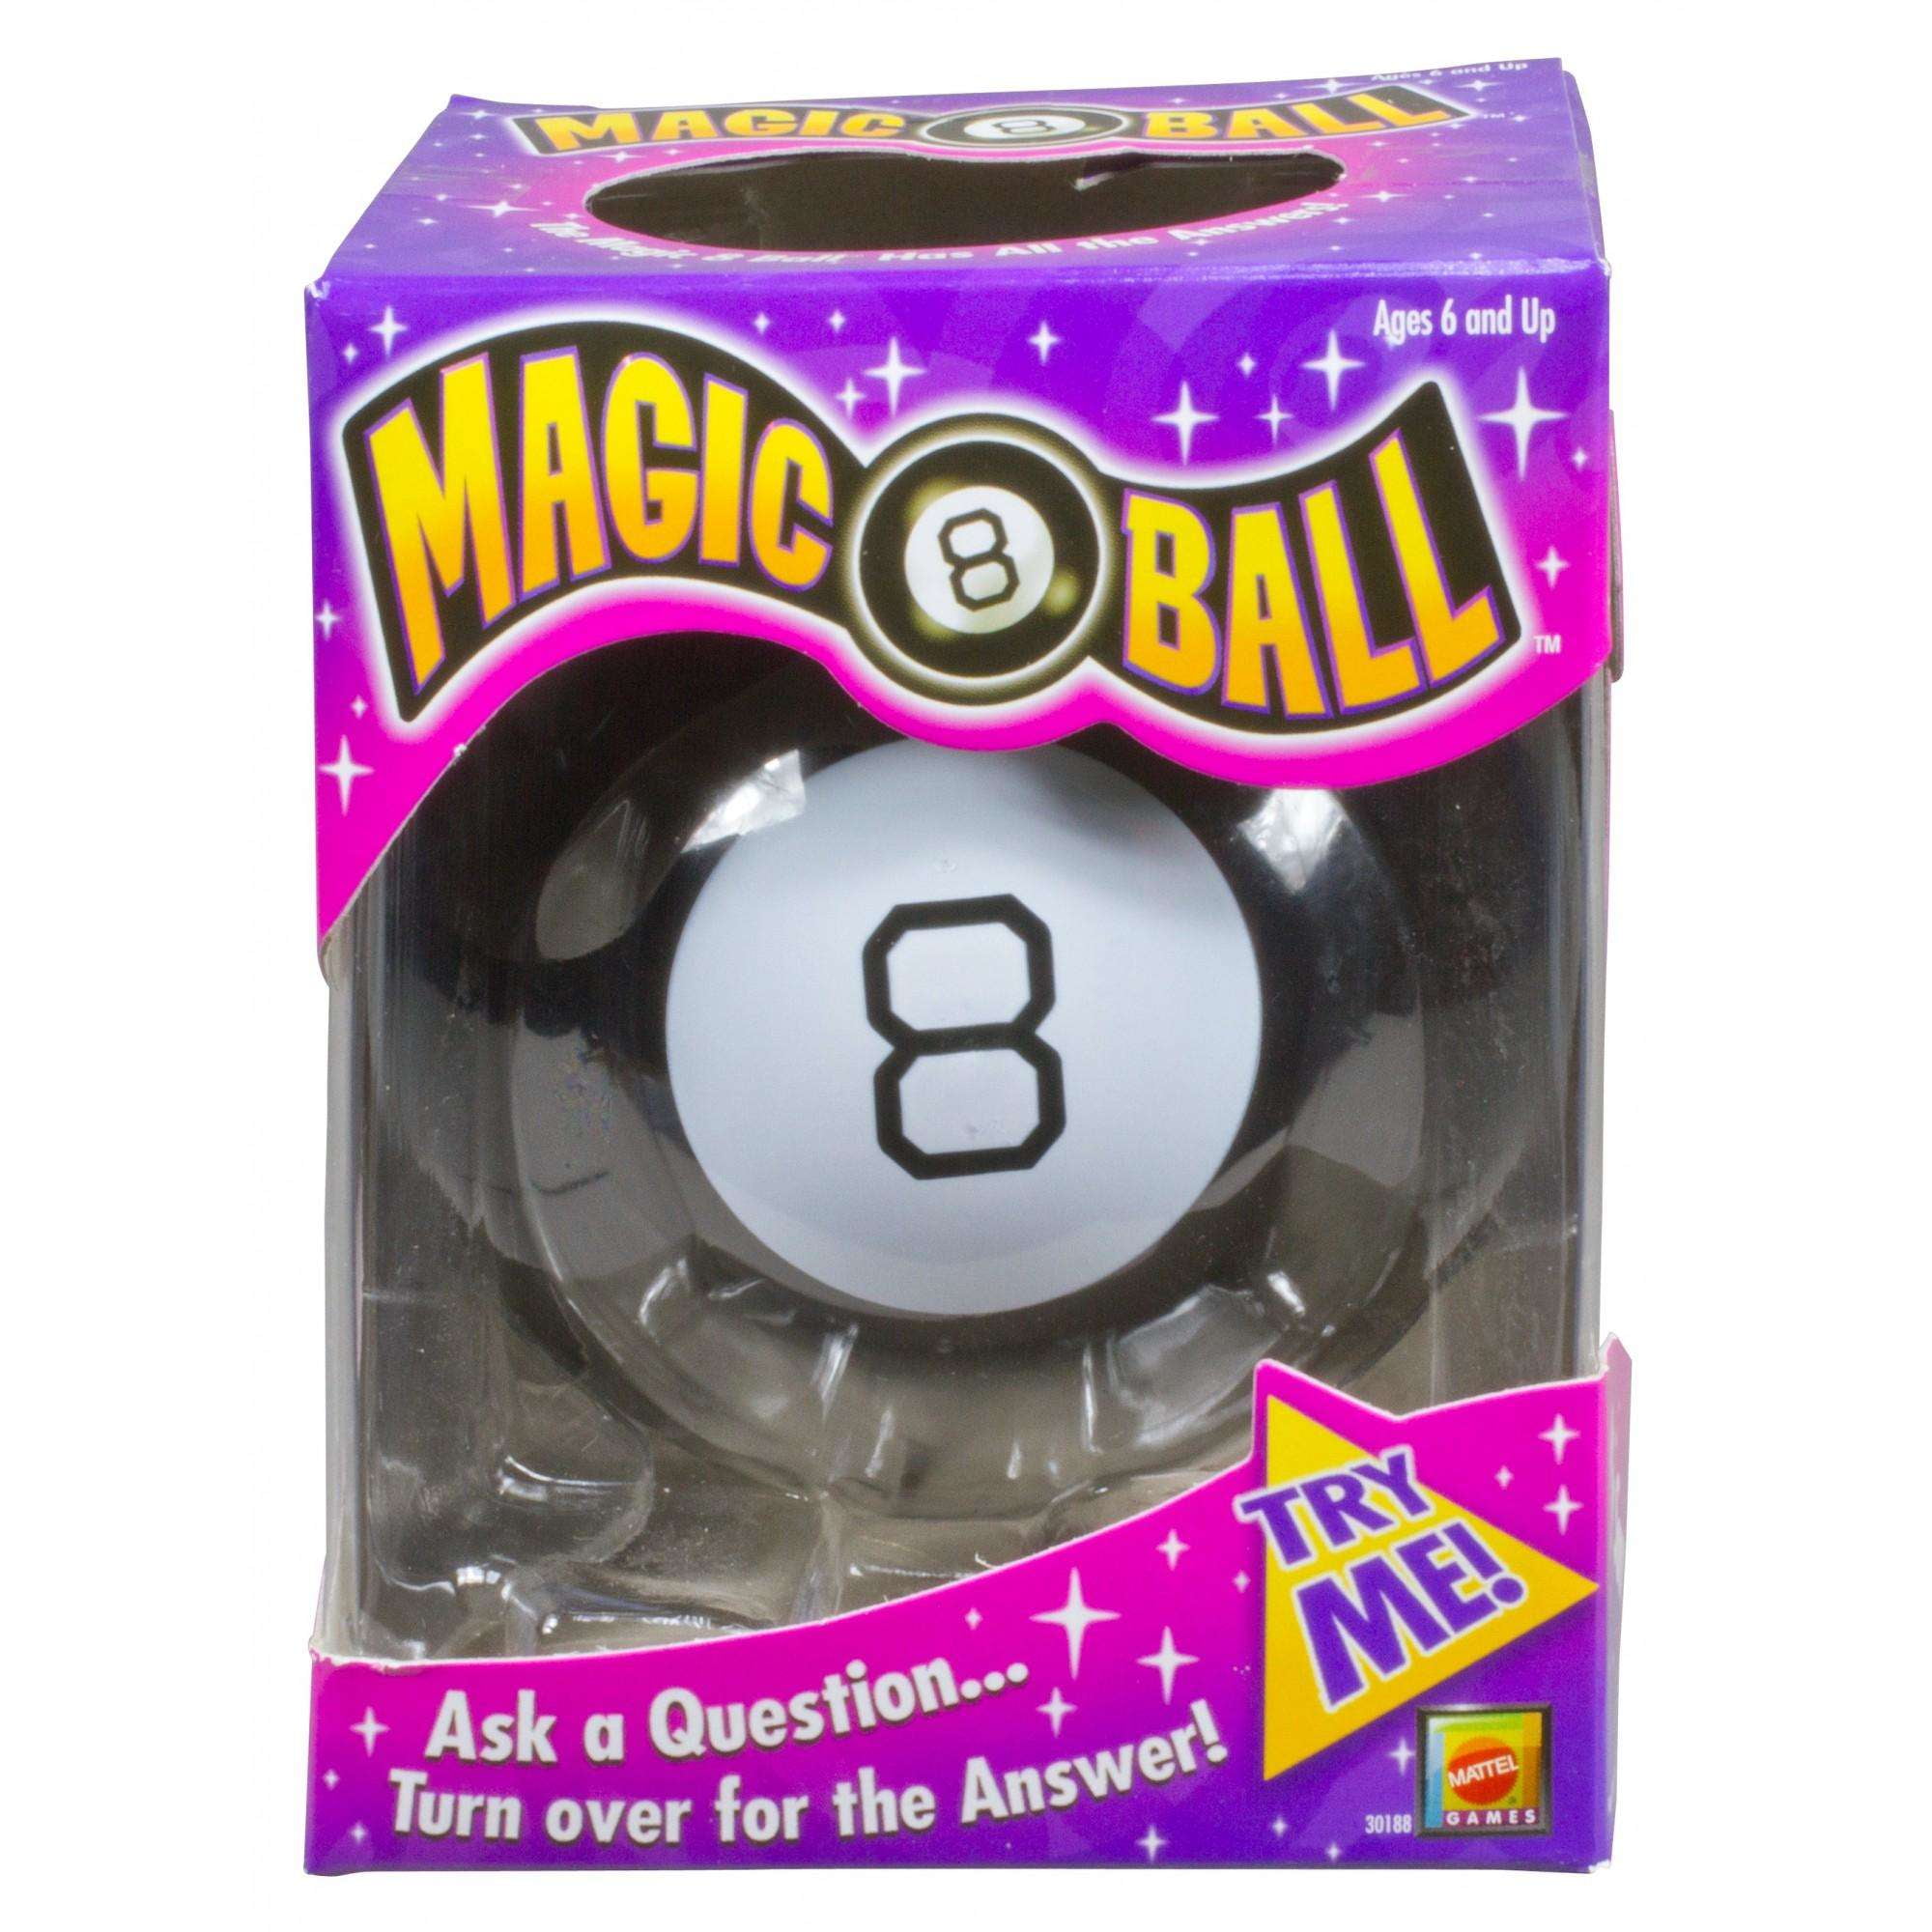 Classic Mattel Magic 8 Ball Toy Vintage Game Fortune Teller Kids Lucky Answers for sale online 